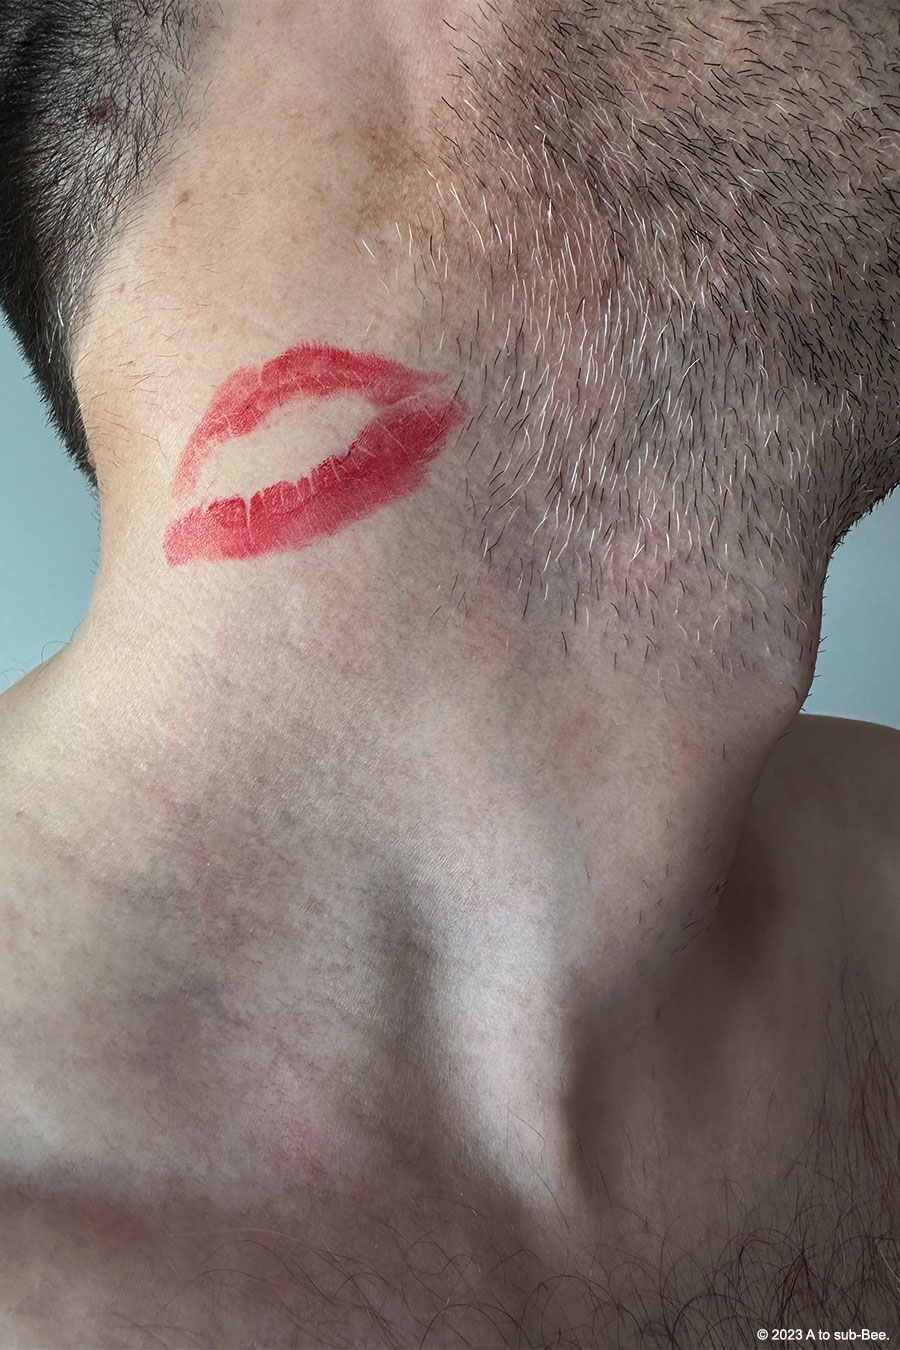 A man's neck with him looking up and to the tight. His salt and pepper stubble looks so hot as does the bright red lipstick mark that's been left behind